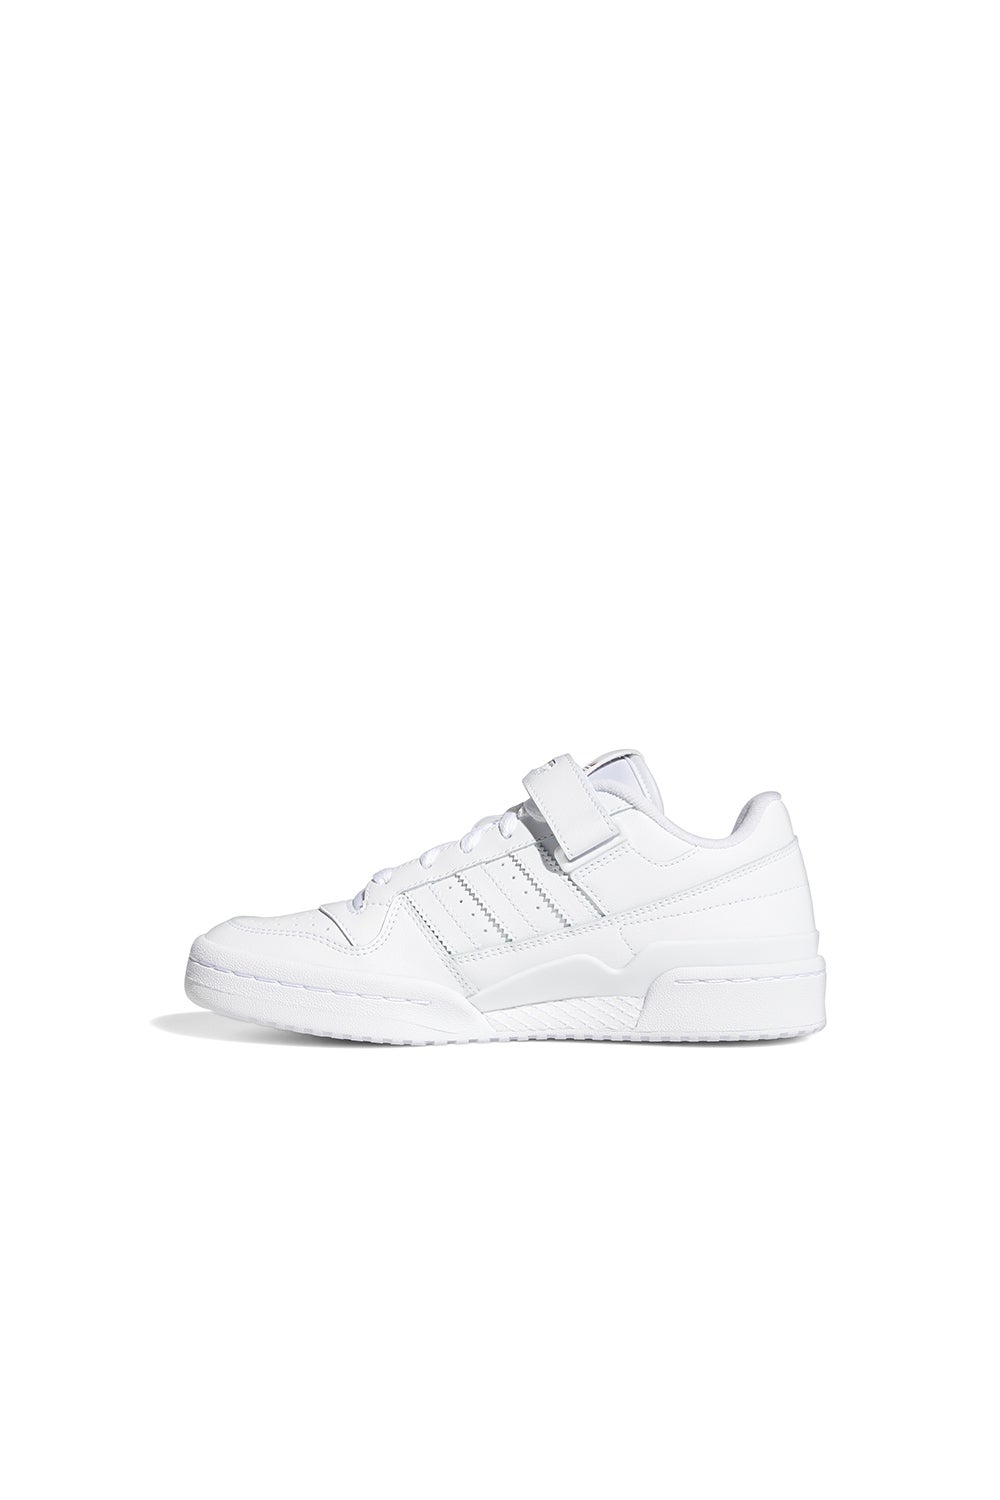 adidas Forum Low Shoes FTWR White/Shock Pink